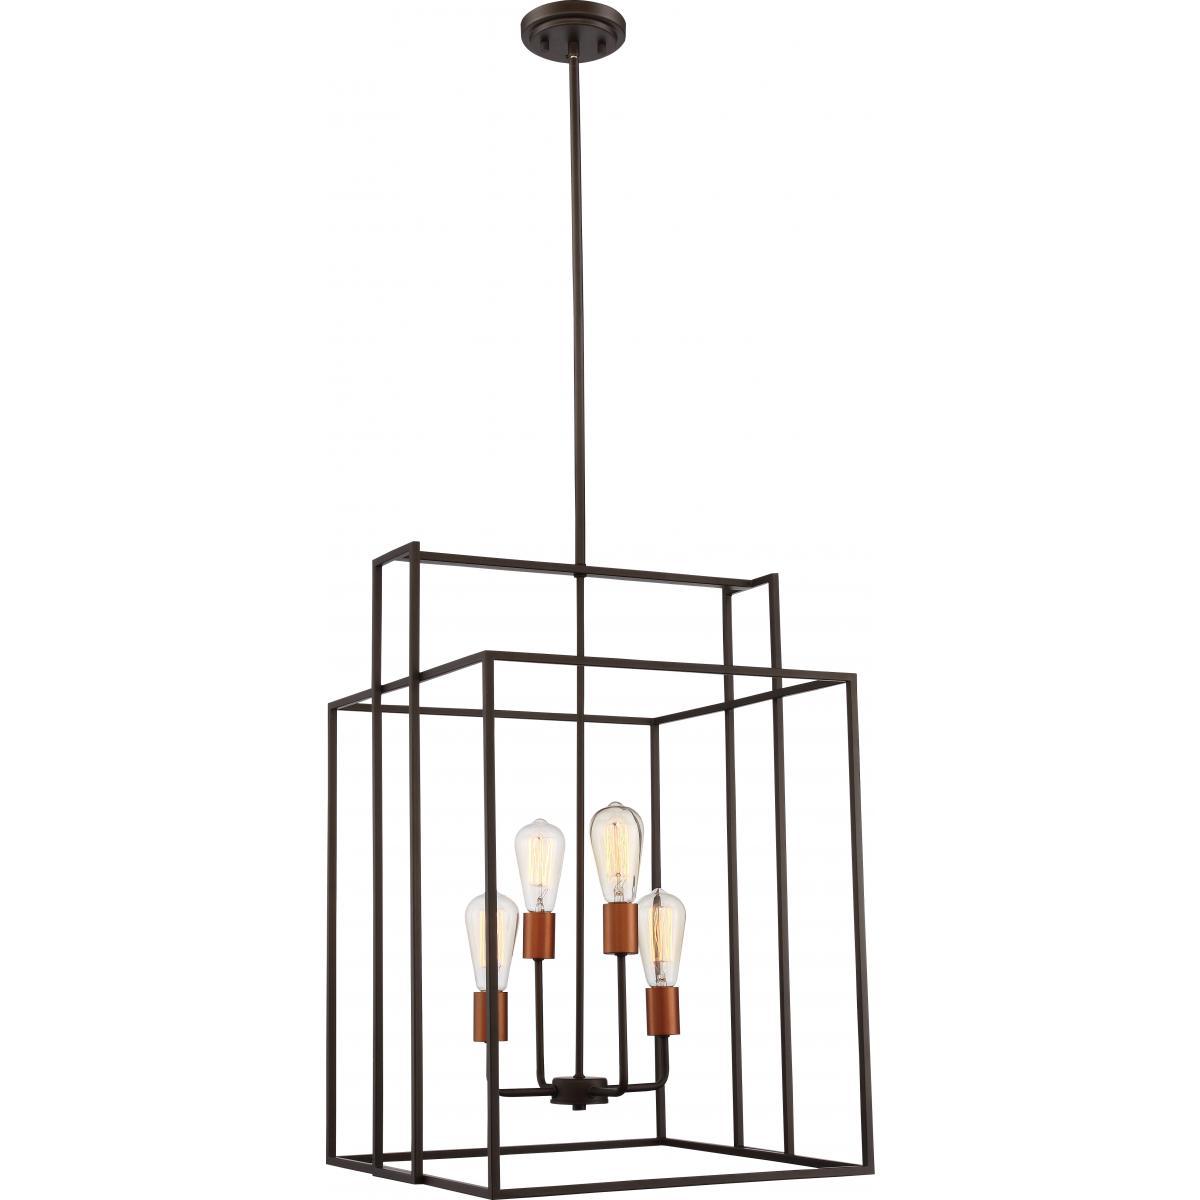 Lake 4 Light 19" Square Pendant Bronze with Copper Accents Finish Ceiling Nuvo Lighting 